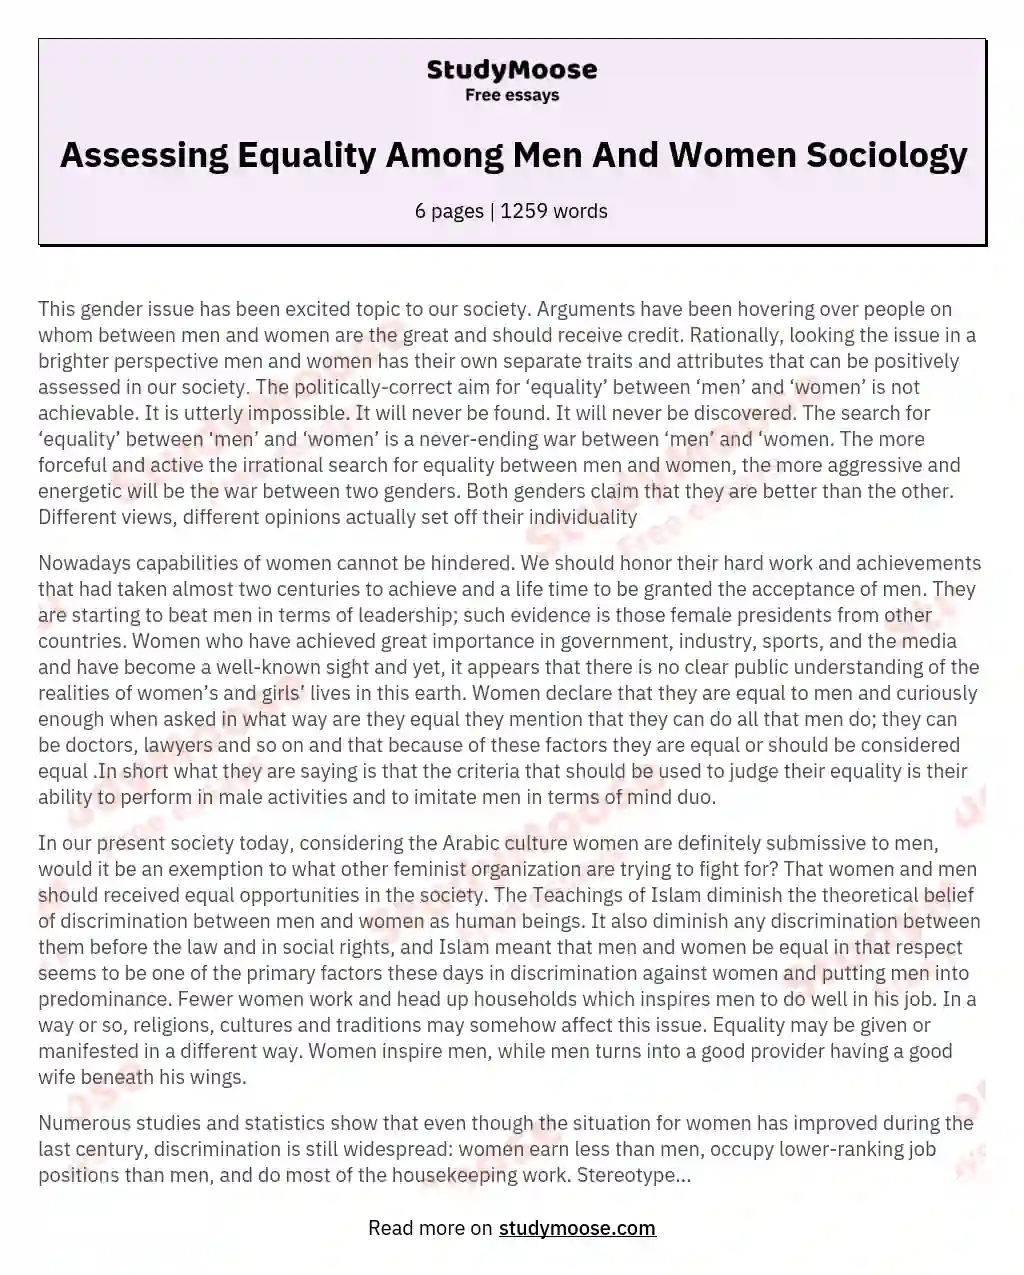 Assessing Equality Among Men And Women Sociology essay